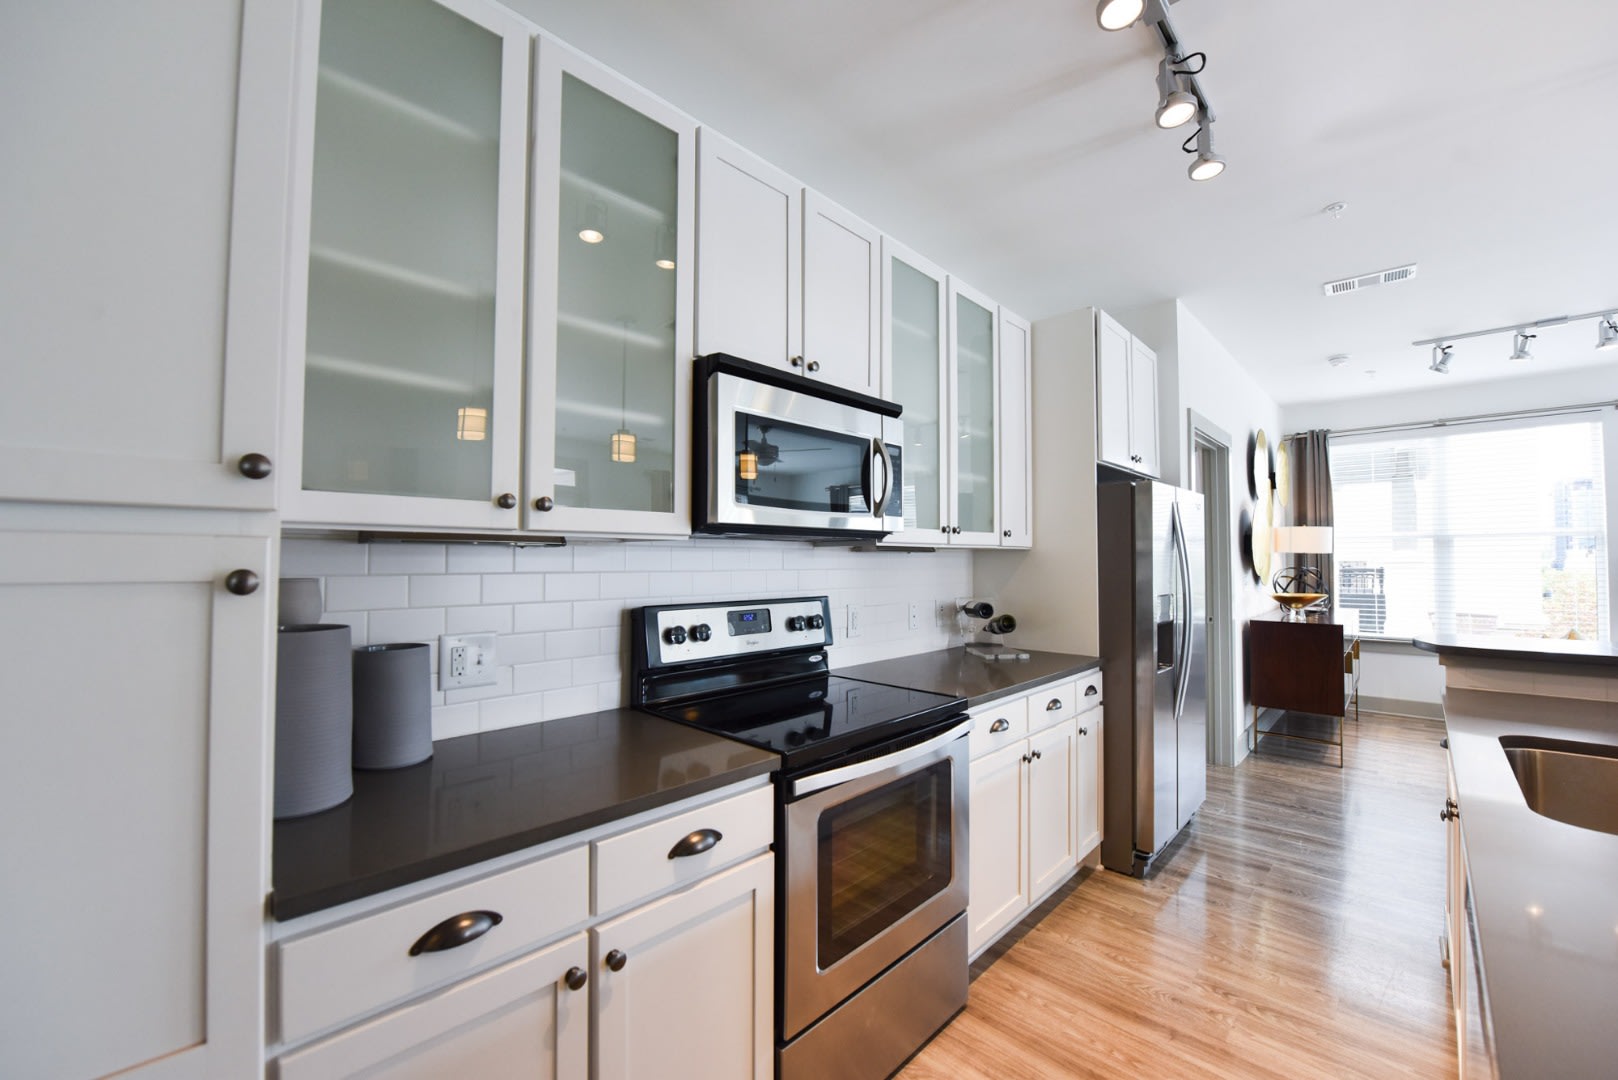 Apartments Near Westside Park -The Haven at Avalon - Spacious Kitchen with White Cabinets, Granite or Quartz Countertops, Tile Backsplash, Wood Grain Plank Flooring, and Stainless Steel Appliances.